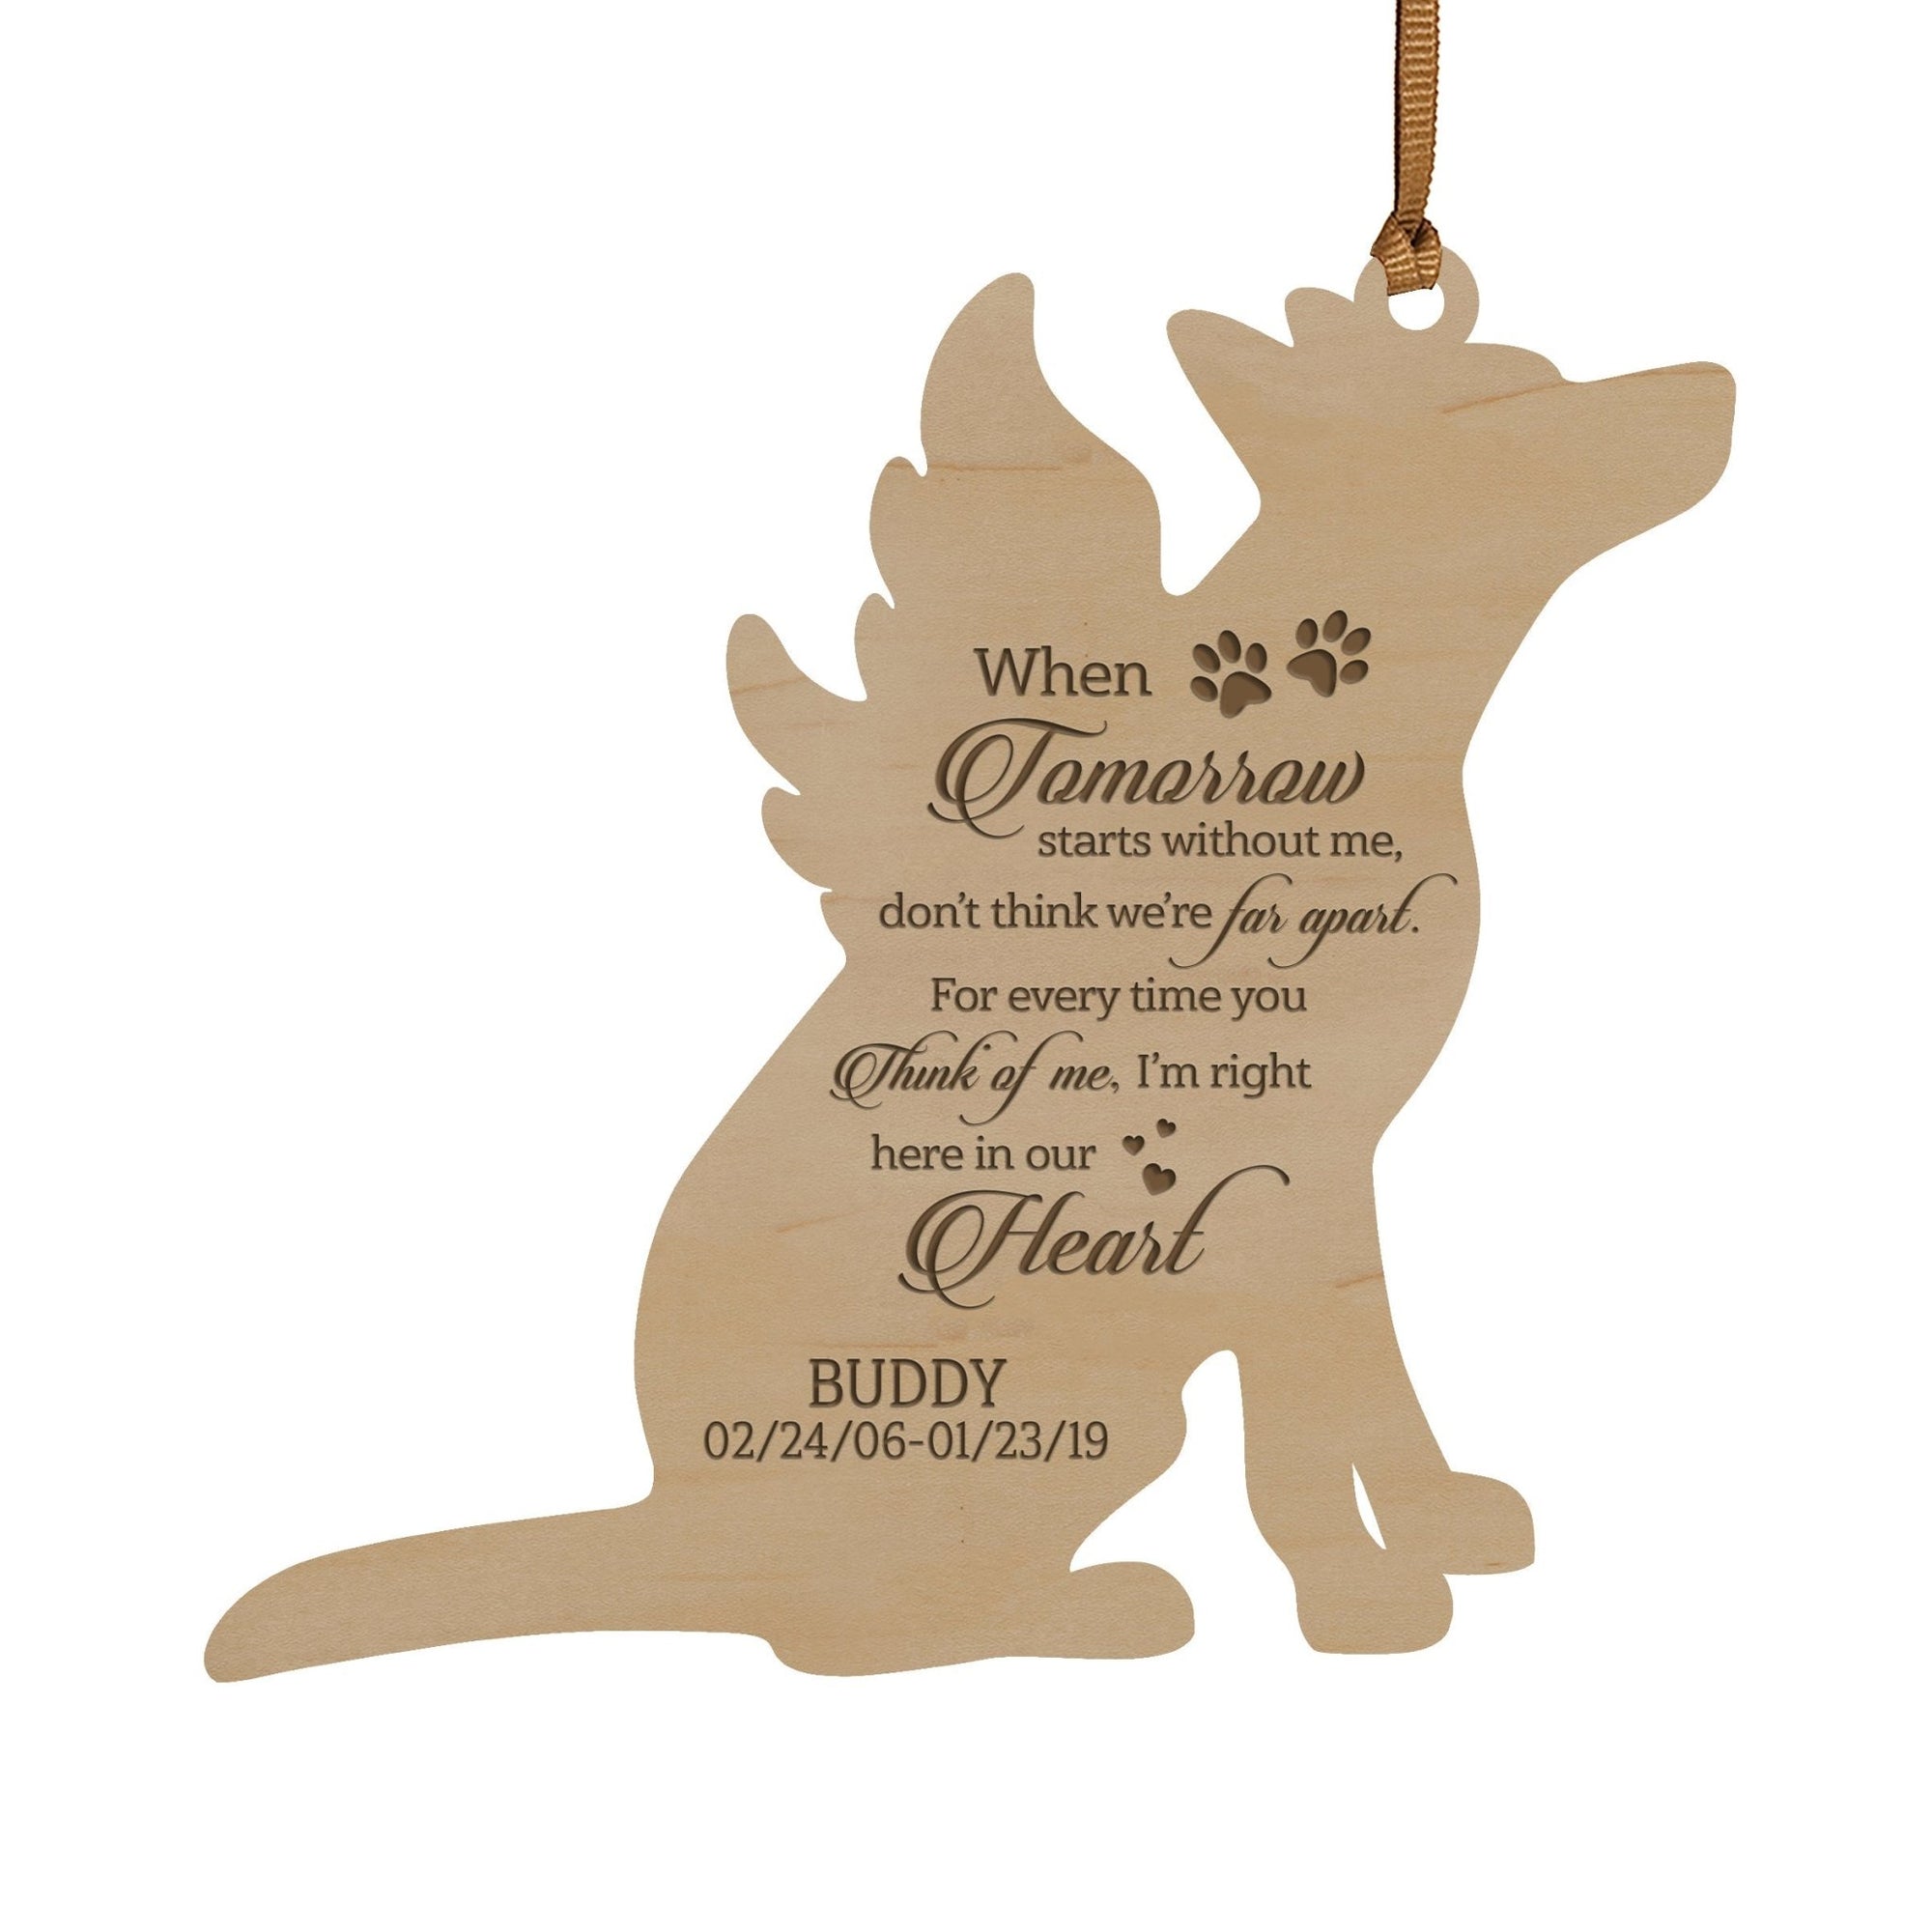 Pet Memorial Wooden Dog or Cat Ornament - When Tomorrow Starts Without Me - LifeSong Milestones